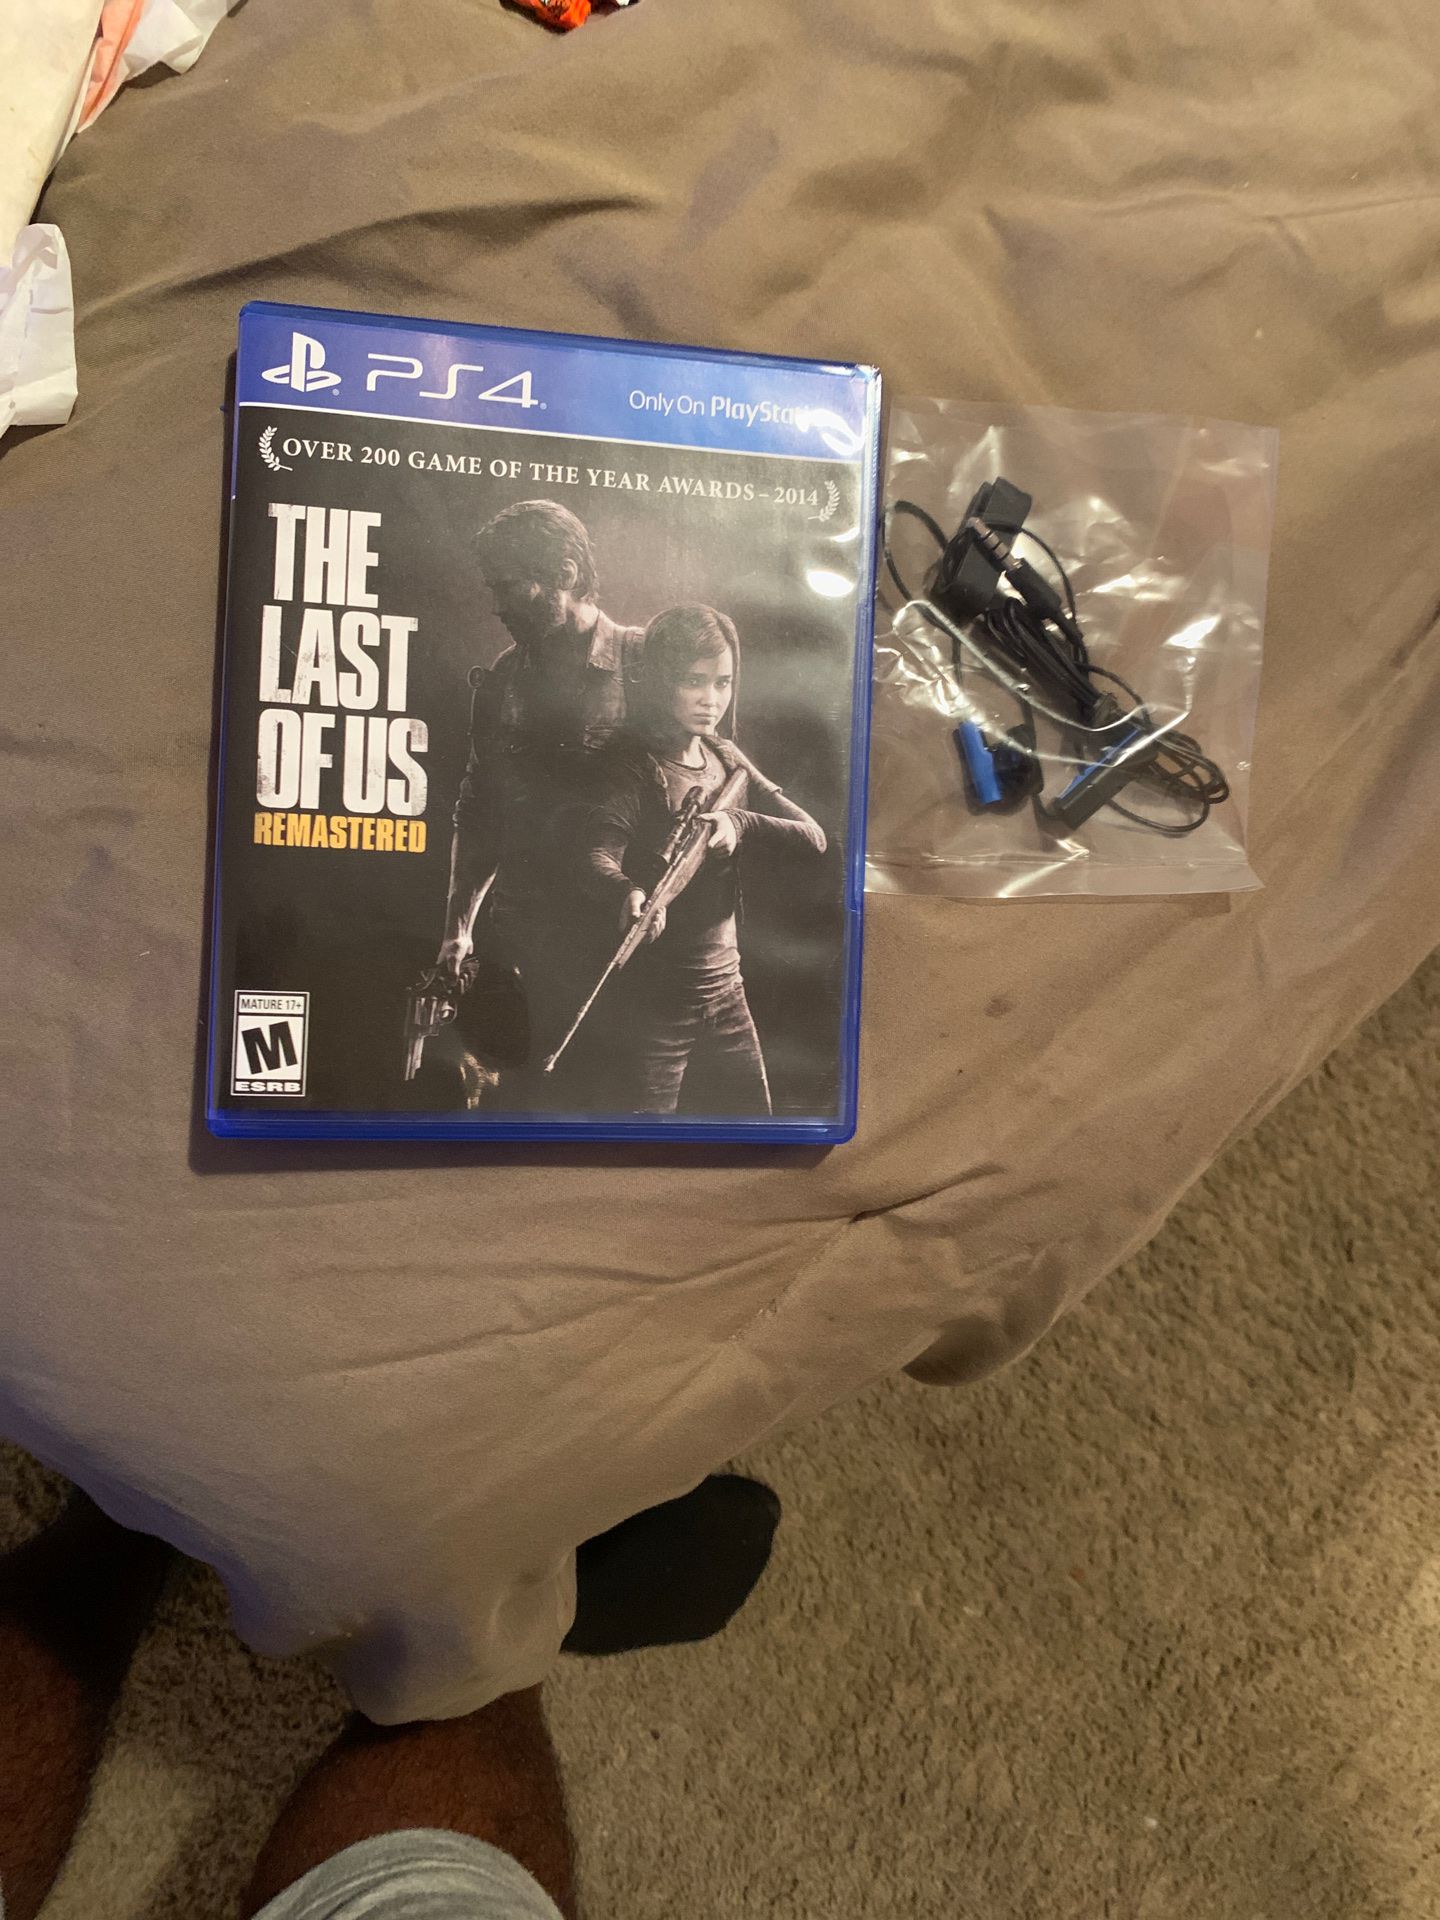 Brand new game an head set PS4